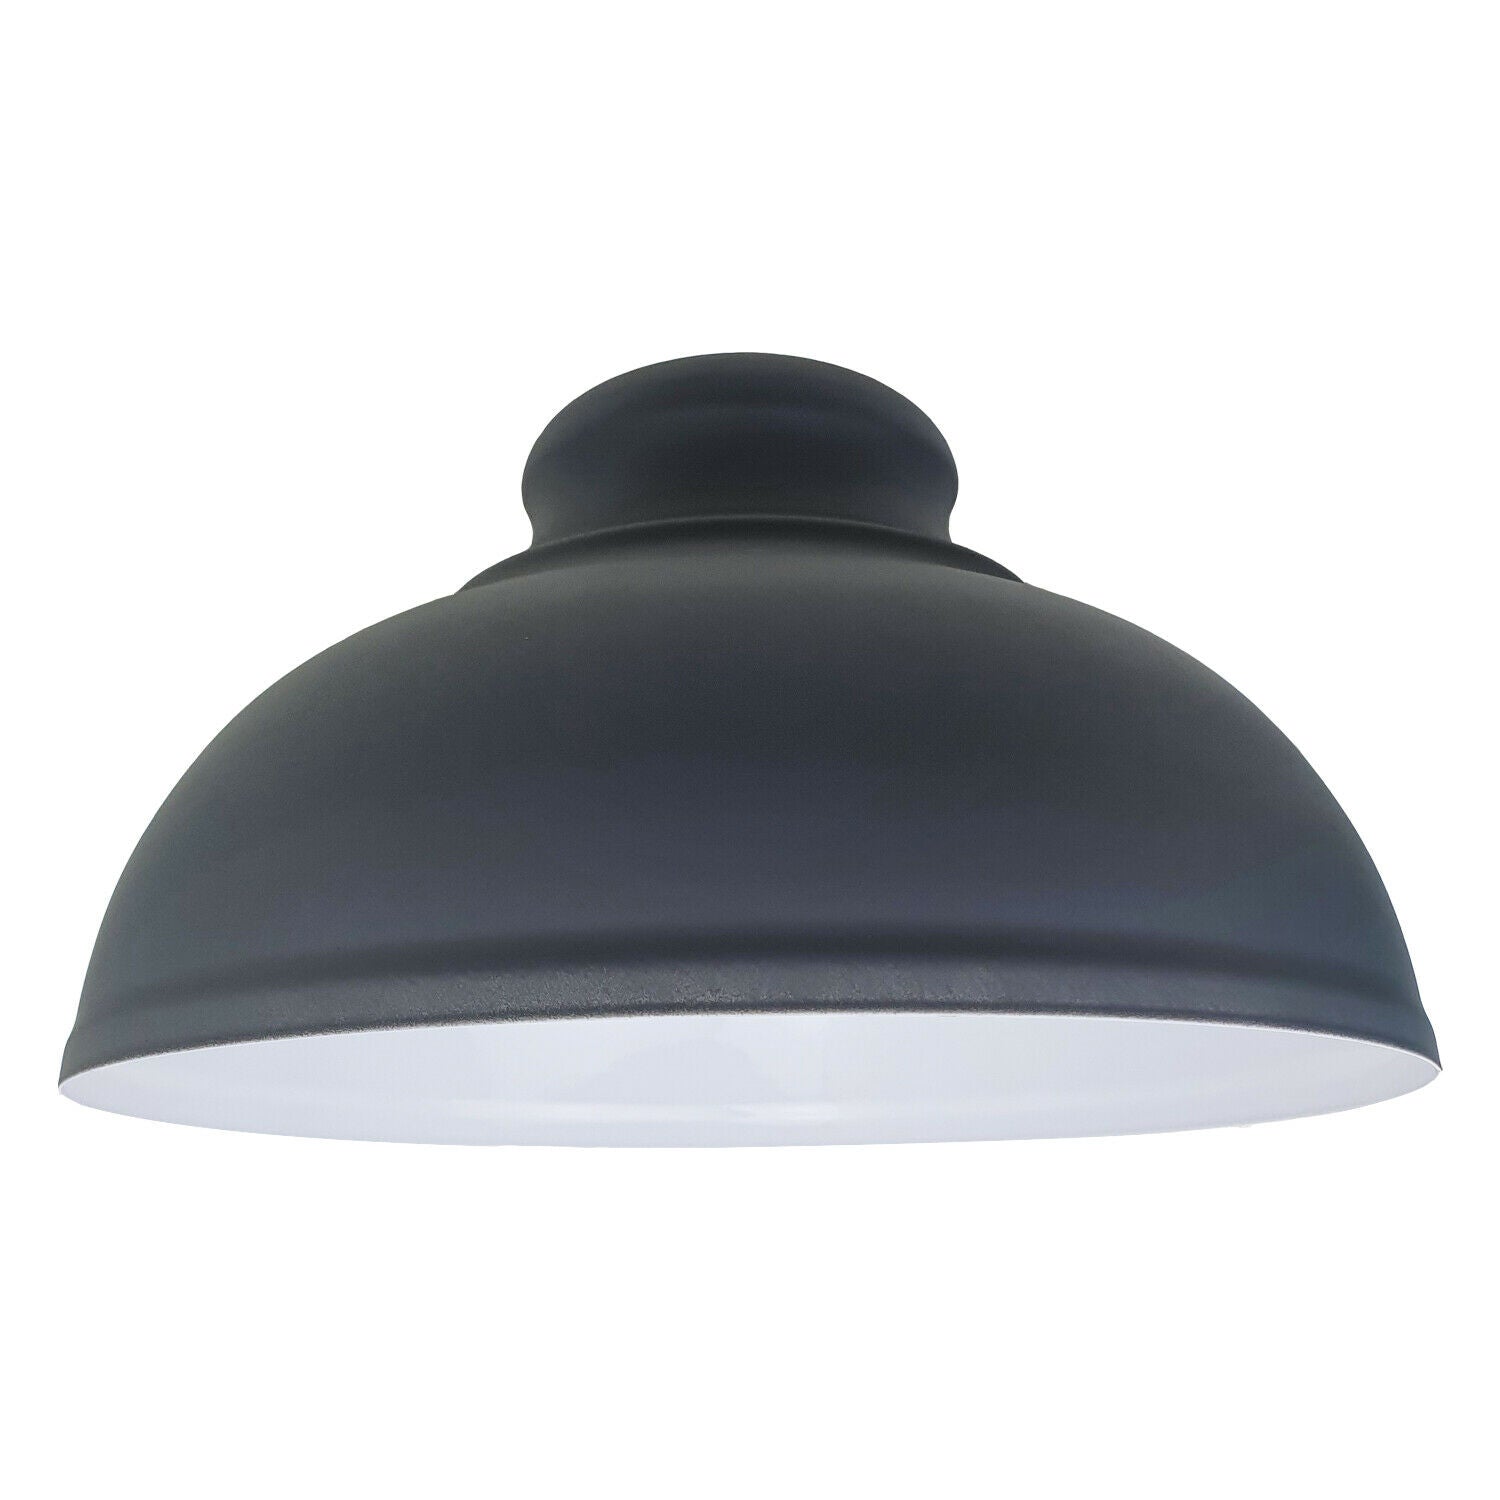 Grey Easy Fit Retro Ceiling Light Includes Shade Reducing Ring~2083 - LEDSone UK Ltd